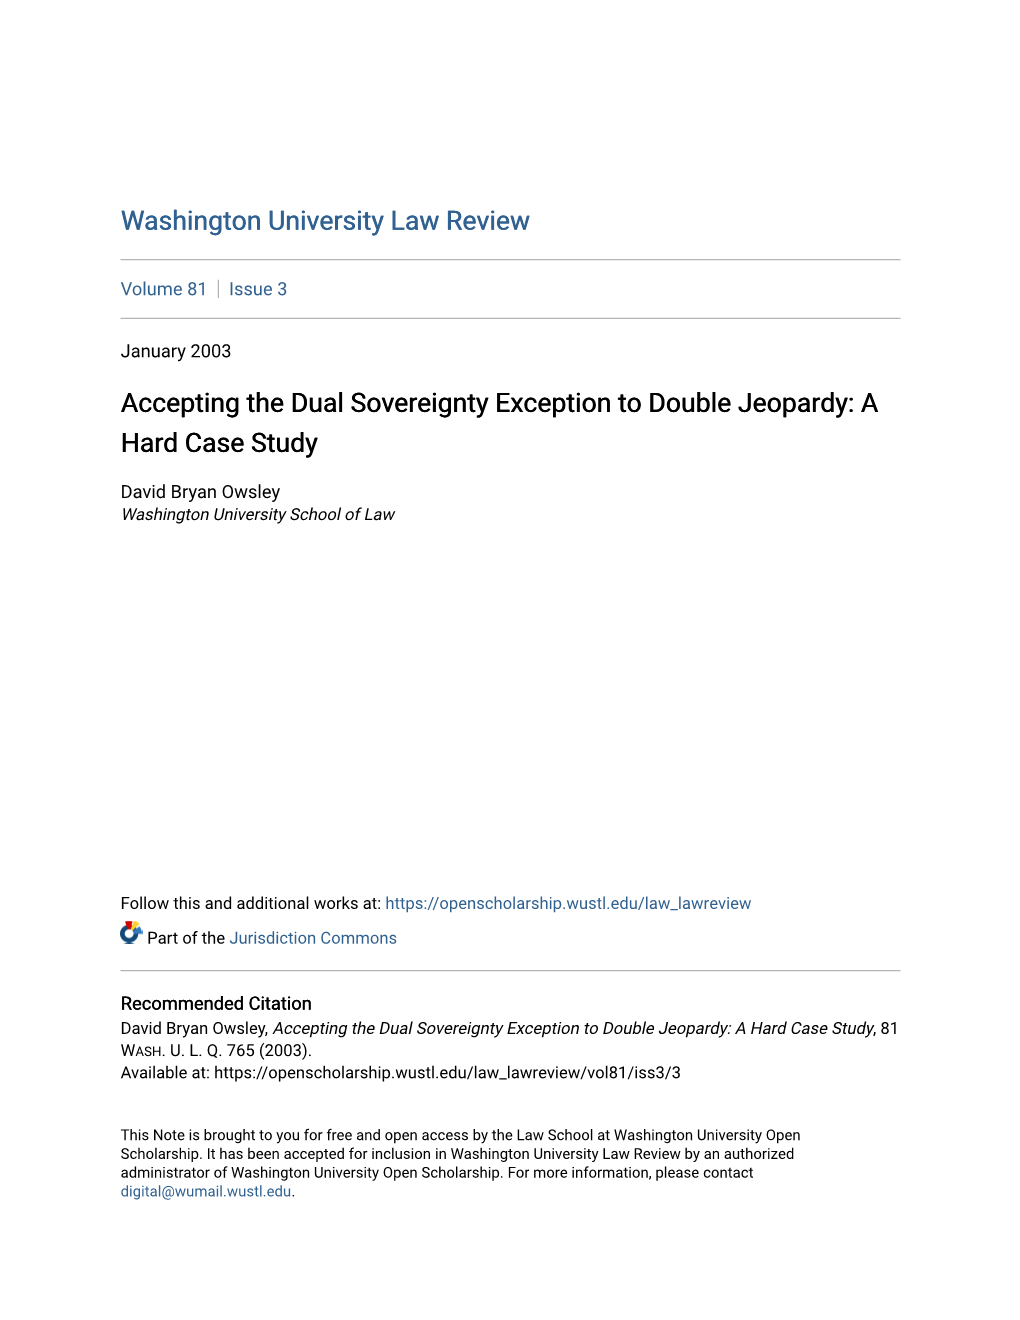 Accepting the Dual Sovereignty Exception to Double Jeopardy: a Hard Case Study